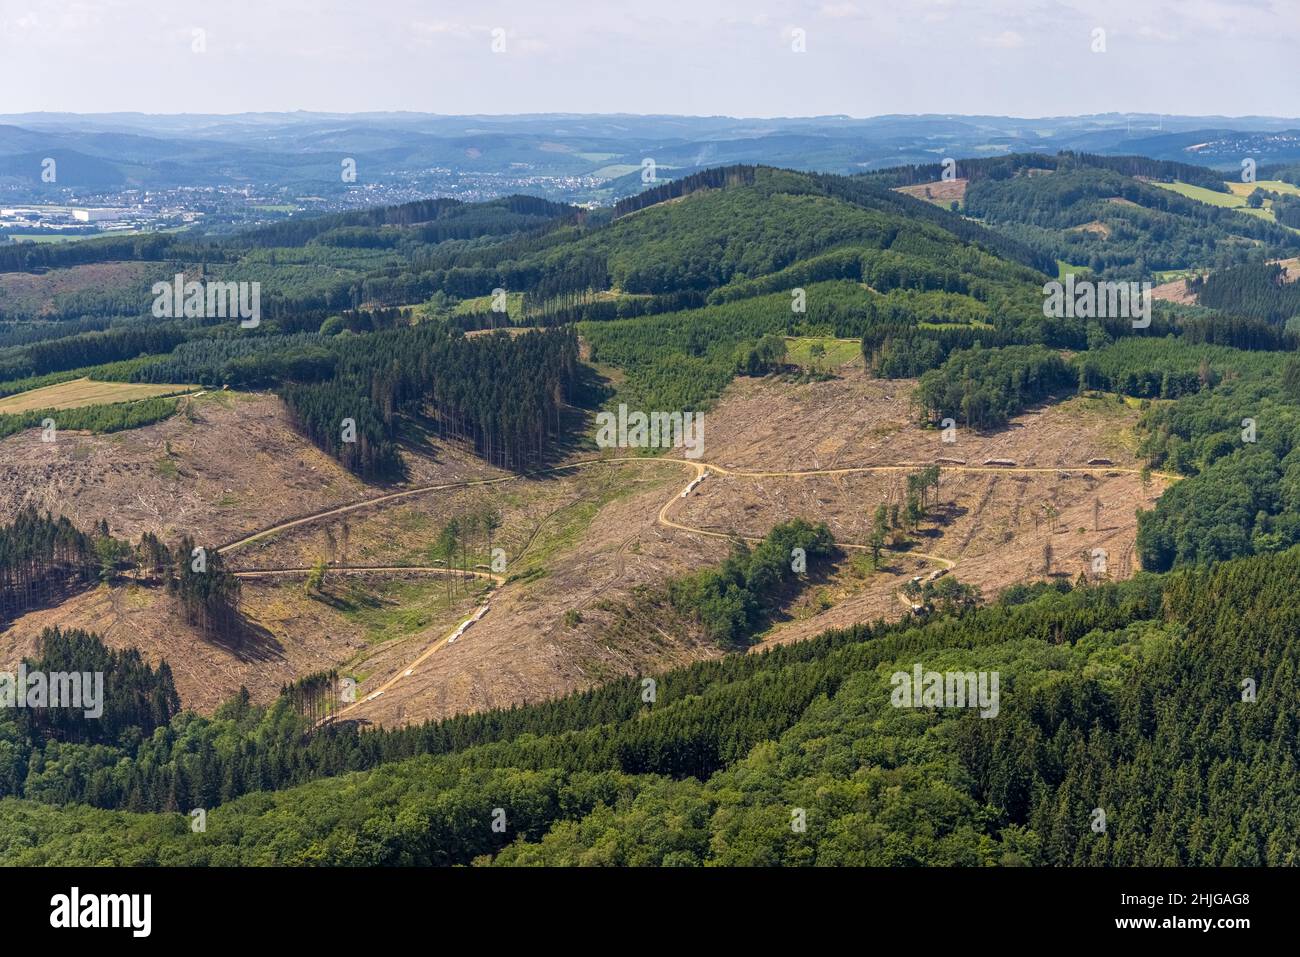 Aerial photograph, forest area with forest damage at Habbecker Berg, Frielentrop, Finnentrop, Sauerland, North Rhine-Westphalia, Germany, tree death, Stock Photo